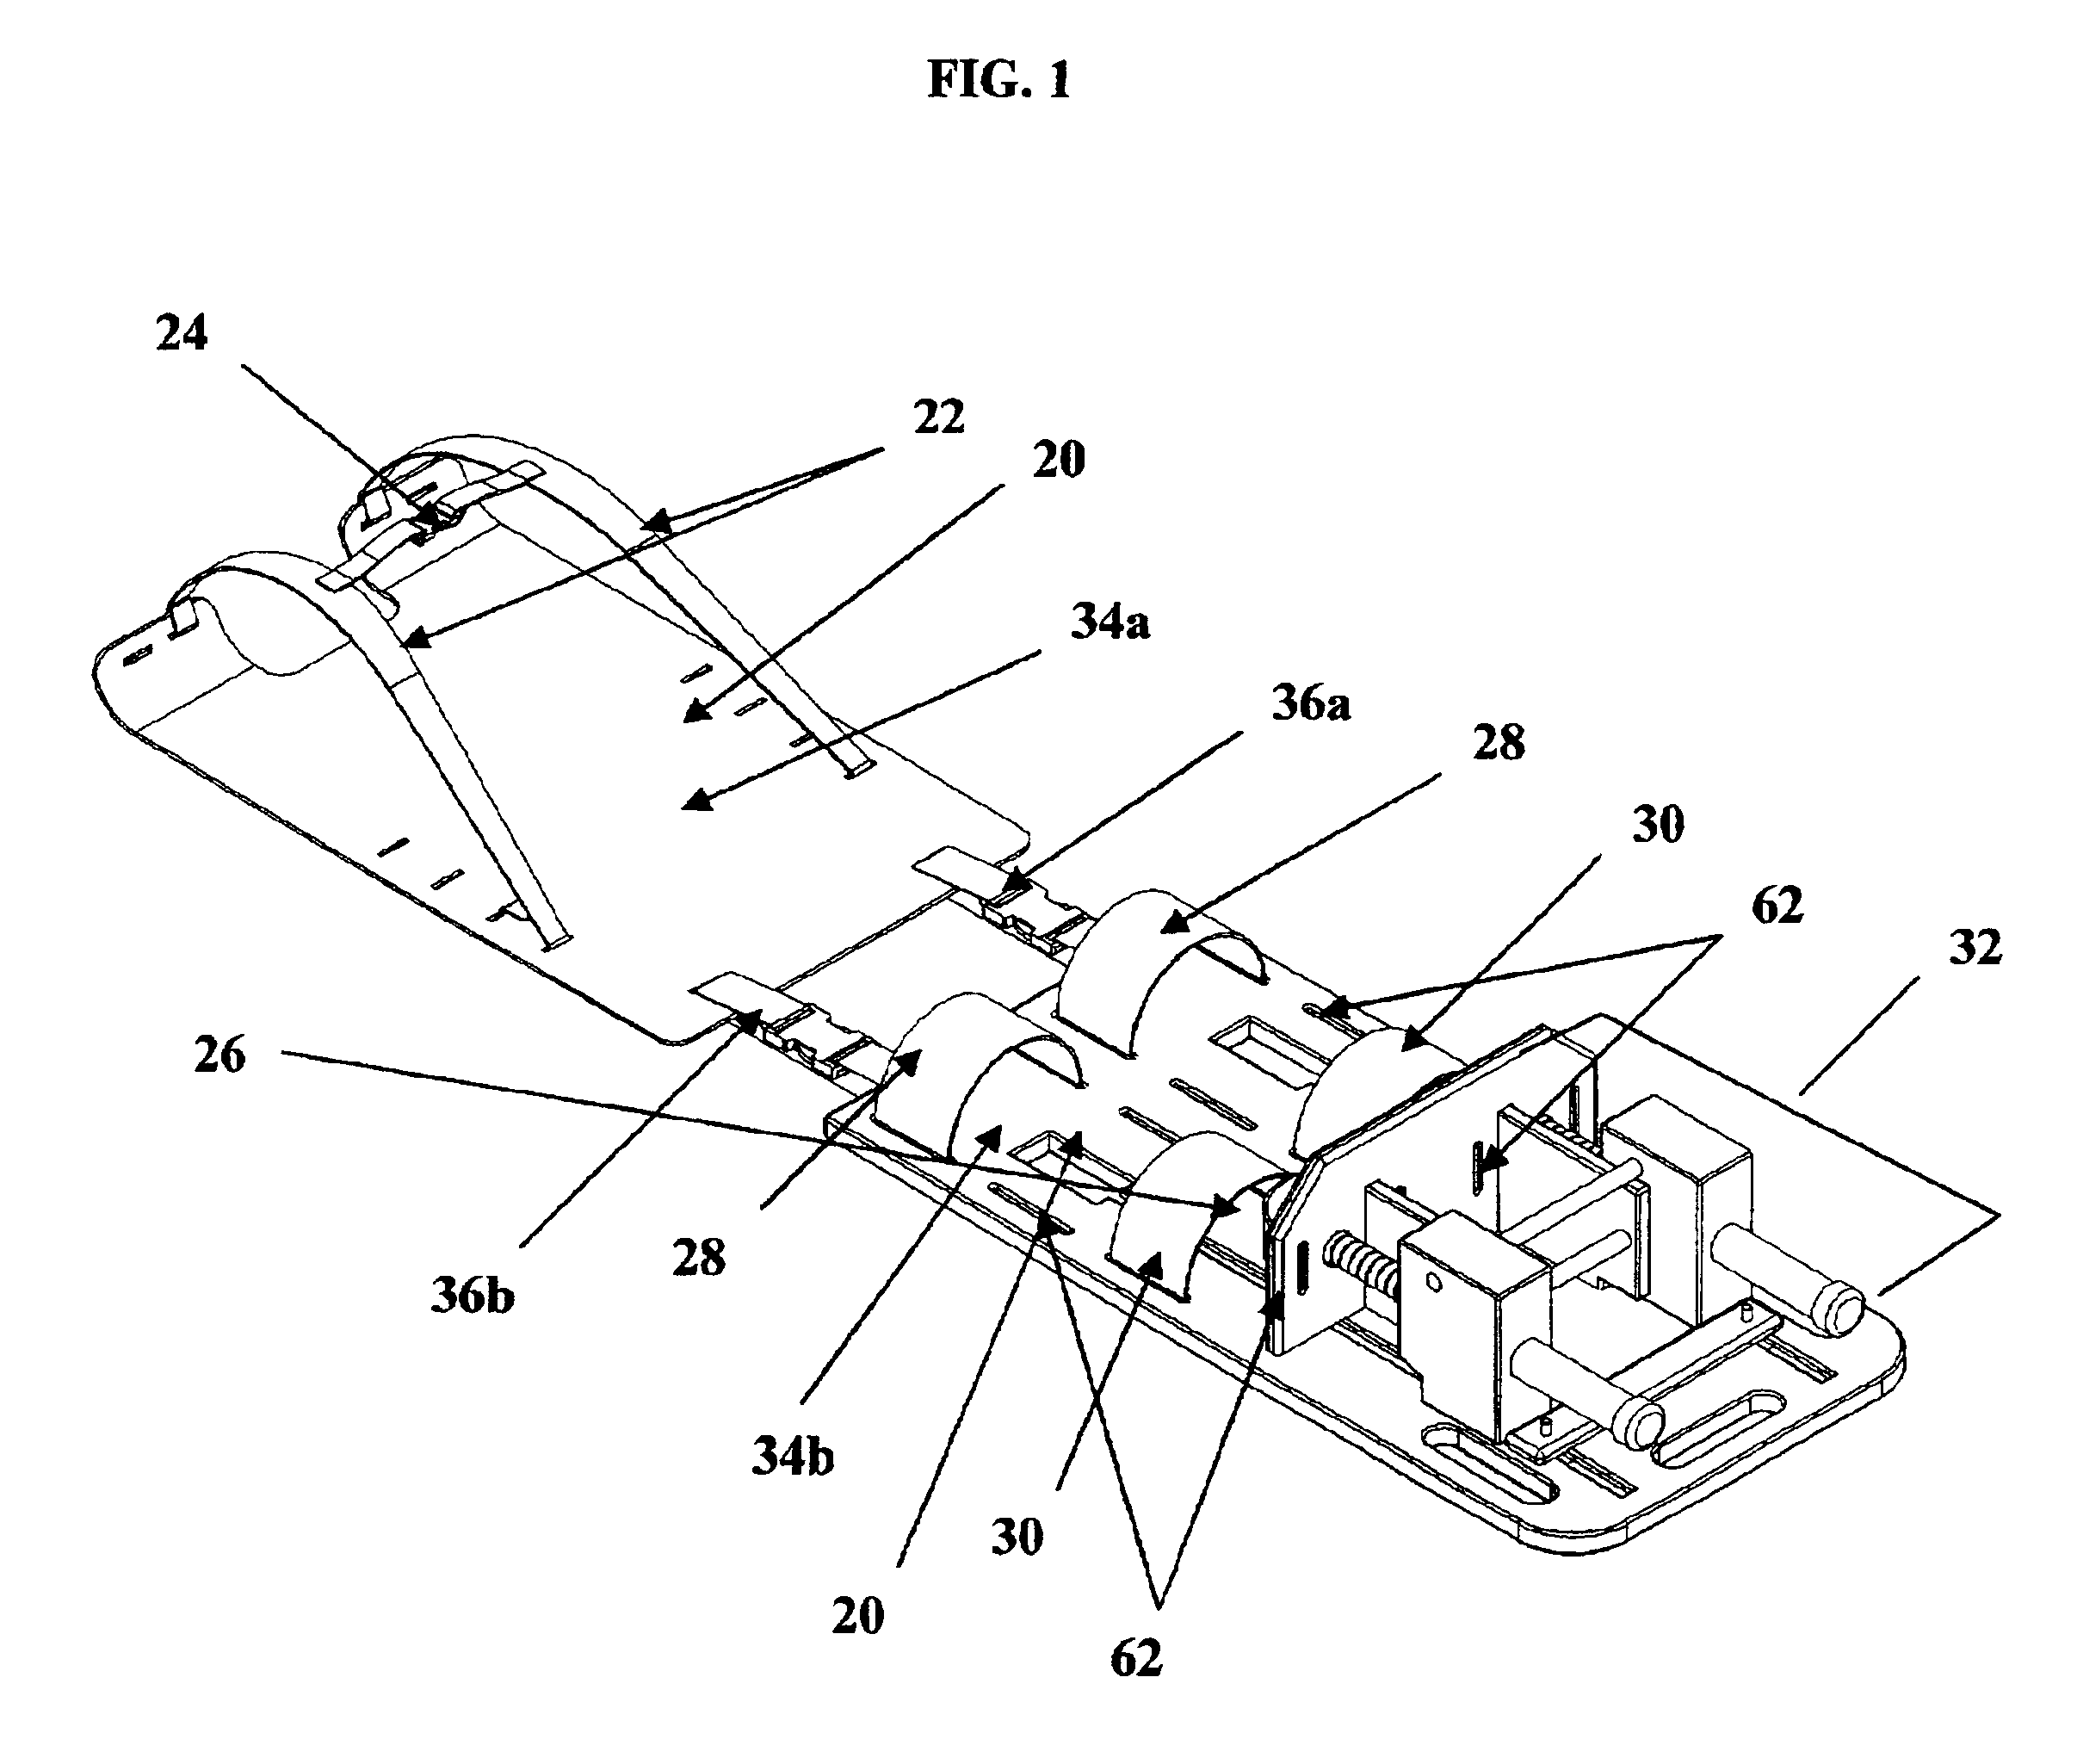 Device for immobilizing a patient and compressing a patient's skeleton, joints and spine during diagnostic procedures using an MRI unit, CT scan unit or x-ray unit